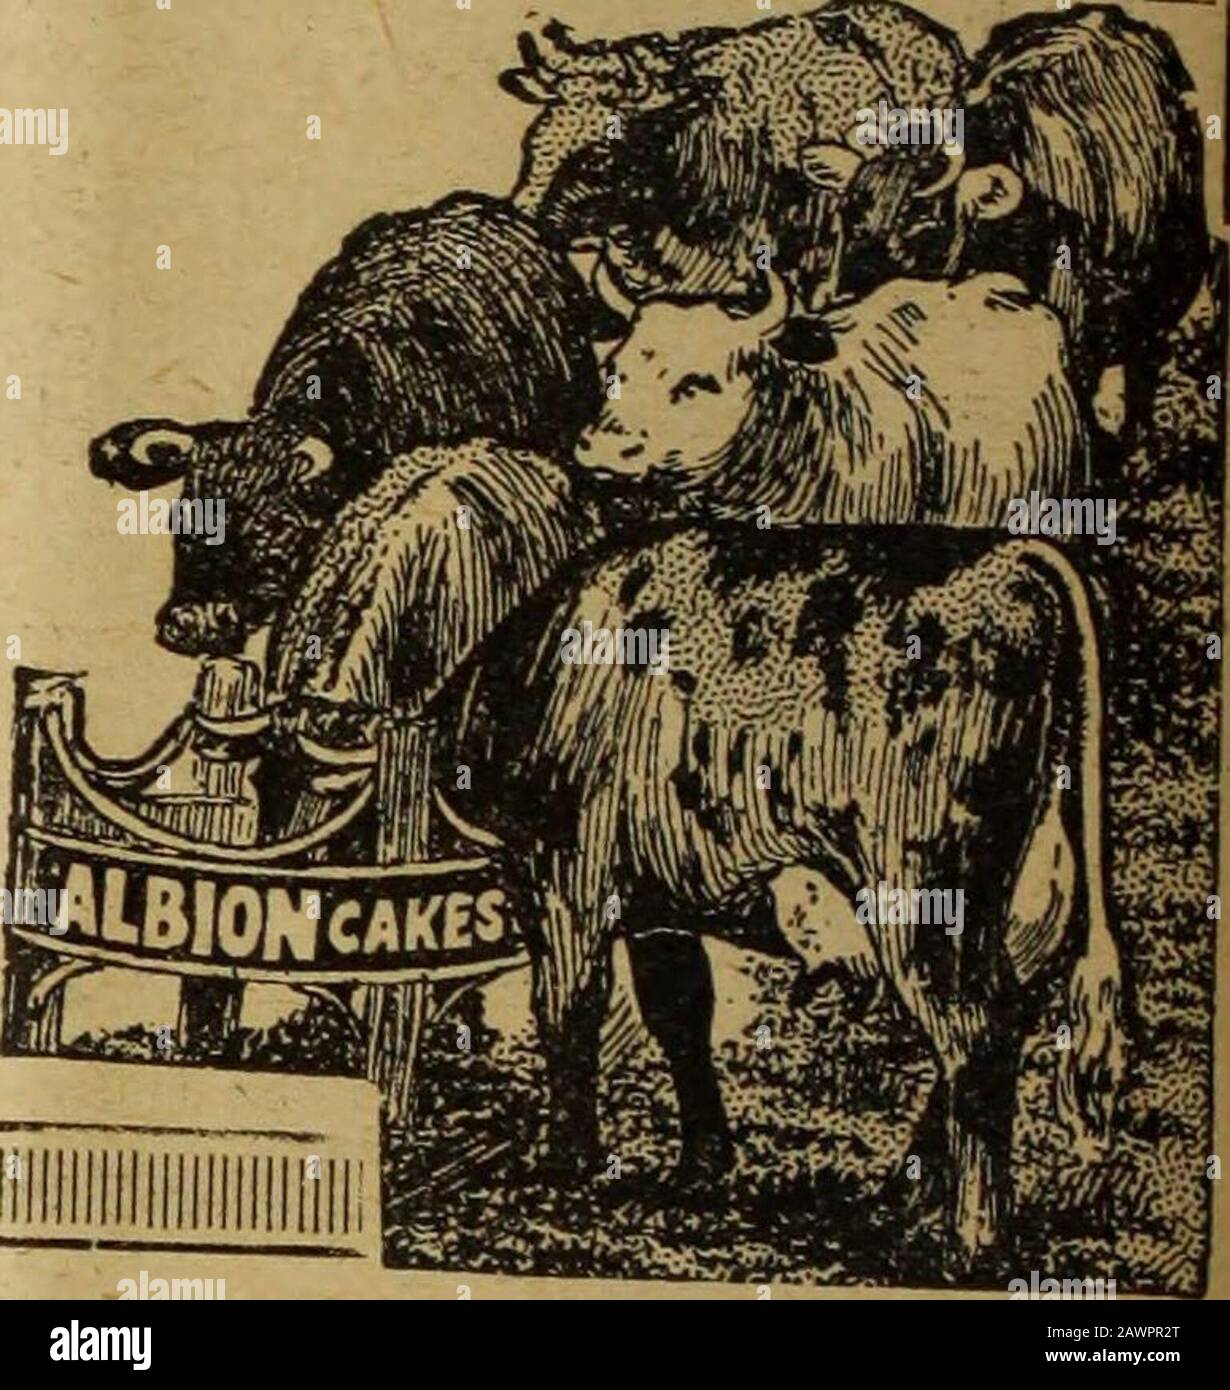 Farmer and stockbreeder . & MEALS Now being Manufacturedin its Celebrated —- PRE-WARQUALITY MEaVTs/s ° ALBION CALF J^ ^^^^ tl order), carriage paid to your nearest Railway Station. Apply to nearest Agent, or to the Scls Manuractarers- SIMMONDS, HUNT & MONTGOMERY, Ltd.,LIVERPOOL. jFirm founded 1827.)(Agents wanted where not represented.). PALMERS PURE FISH MEAL «24 per ton, £12 2s. 6d. per i ton, «6 2s. ed. per i ton free on rail H,.ii FISH GRAINS, lOs. per ton more FISH MEAL, 30S. per cwt.. carriage paid England and Wales, and to ports. From Thomas Sharp, Esq., Nevill Holt. I can truthfully sa Stock Photo